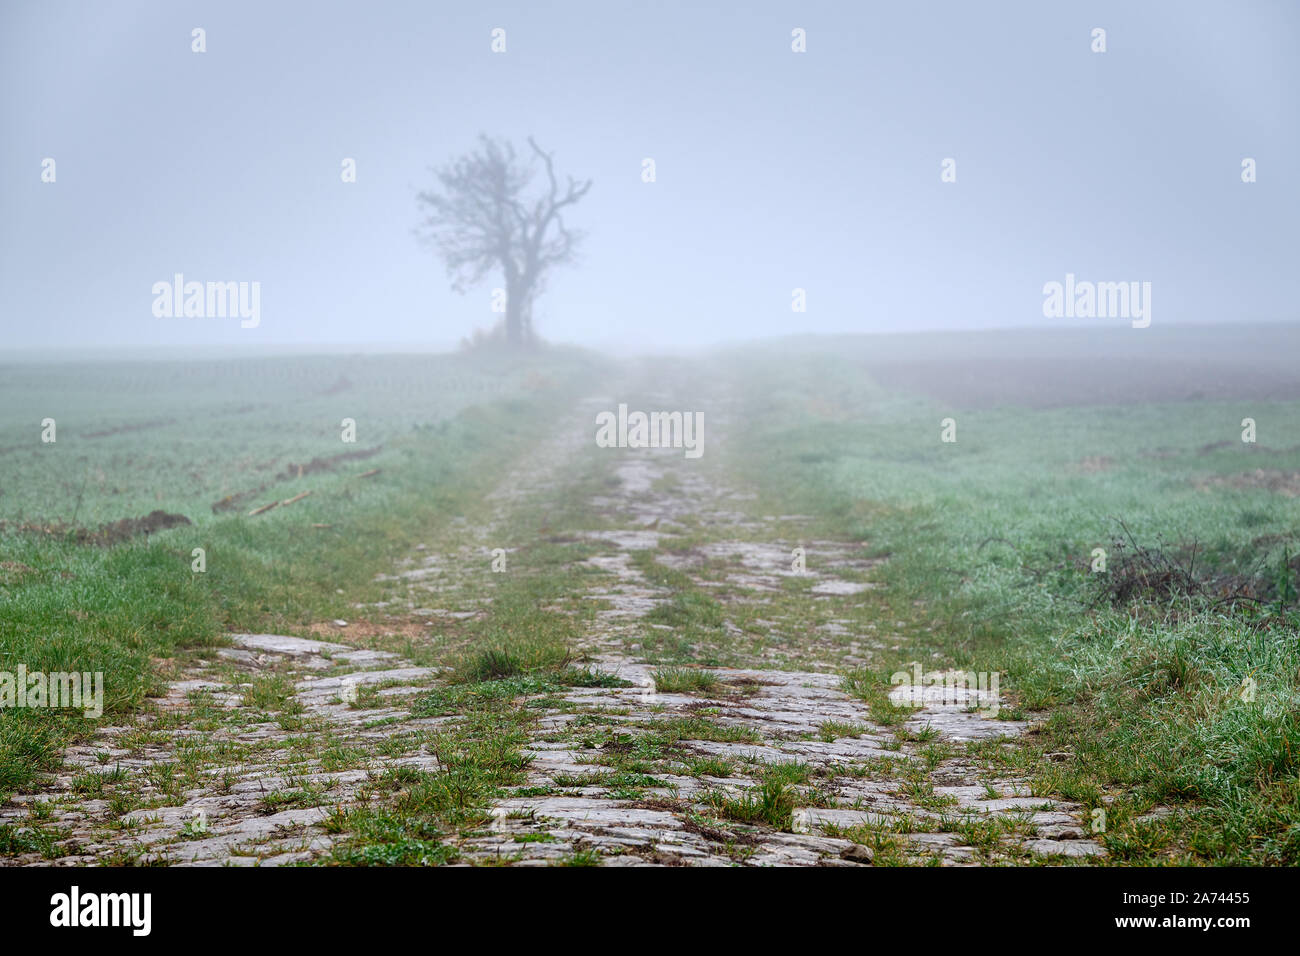 Moody foggy autumn landscape with agricultural fields and a decaying overgrown path leading into the white fog to a single bare tree. Seen in Germany, Stock Photo